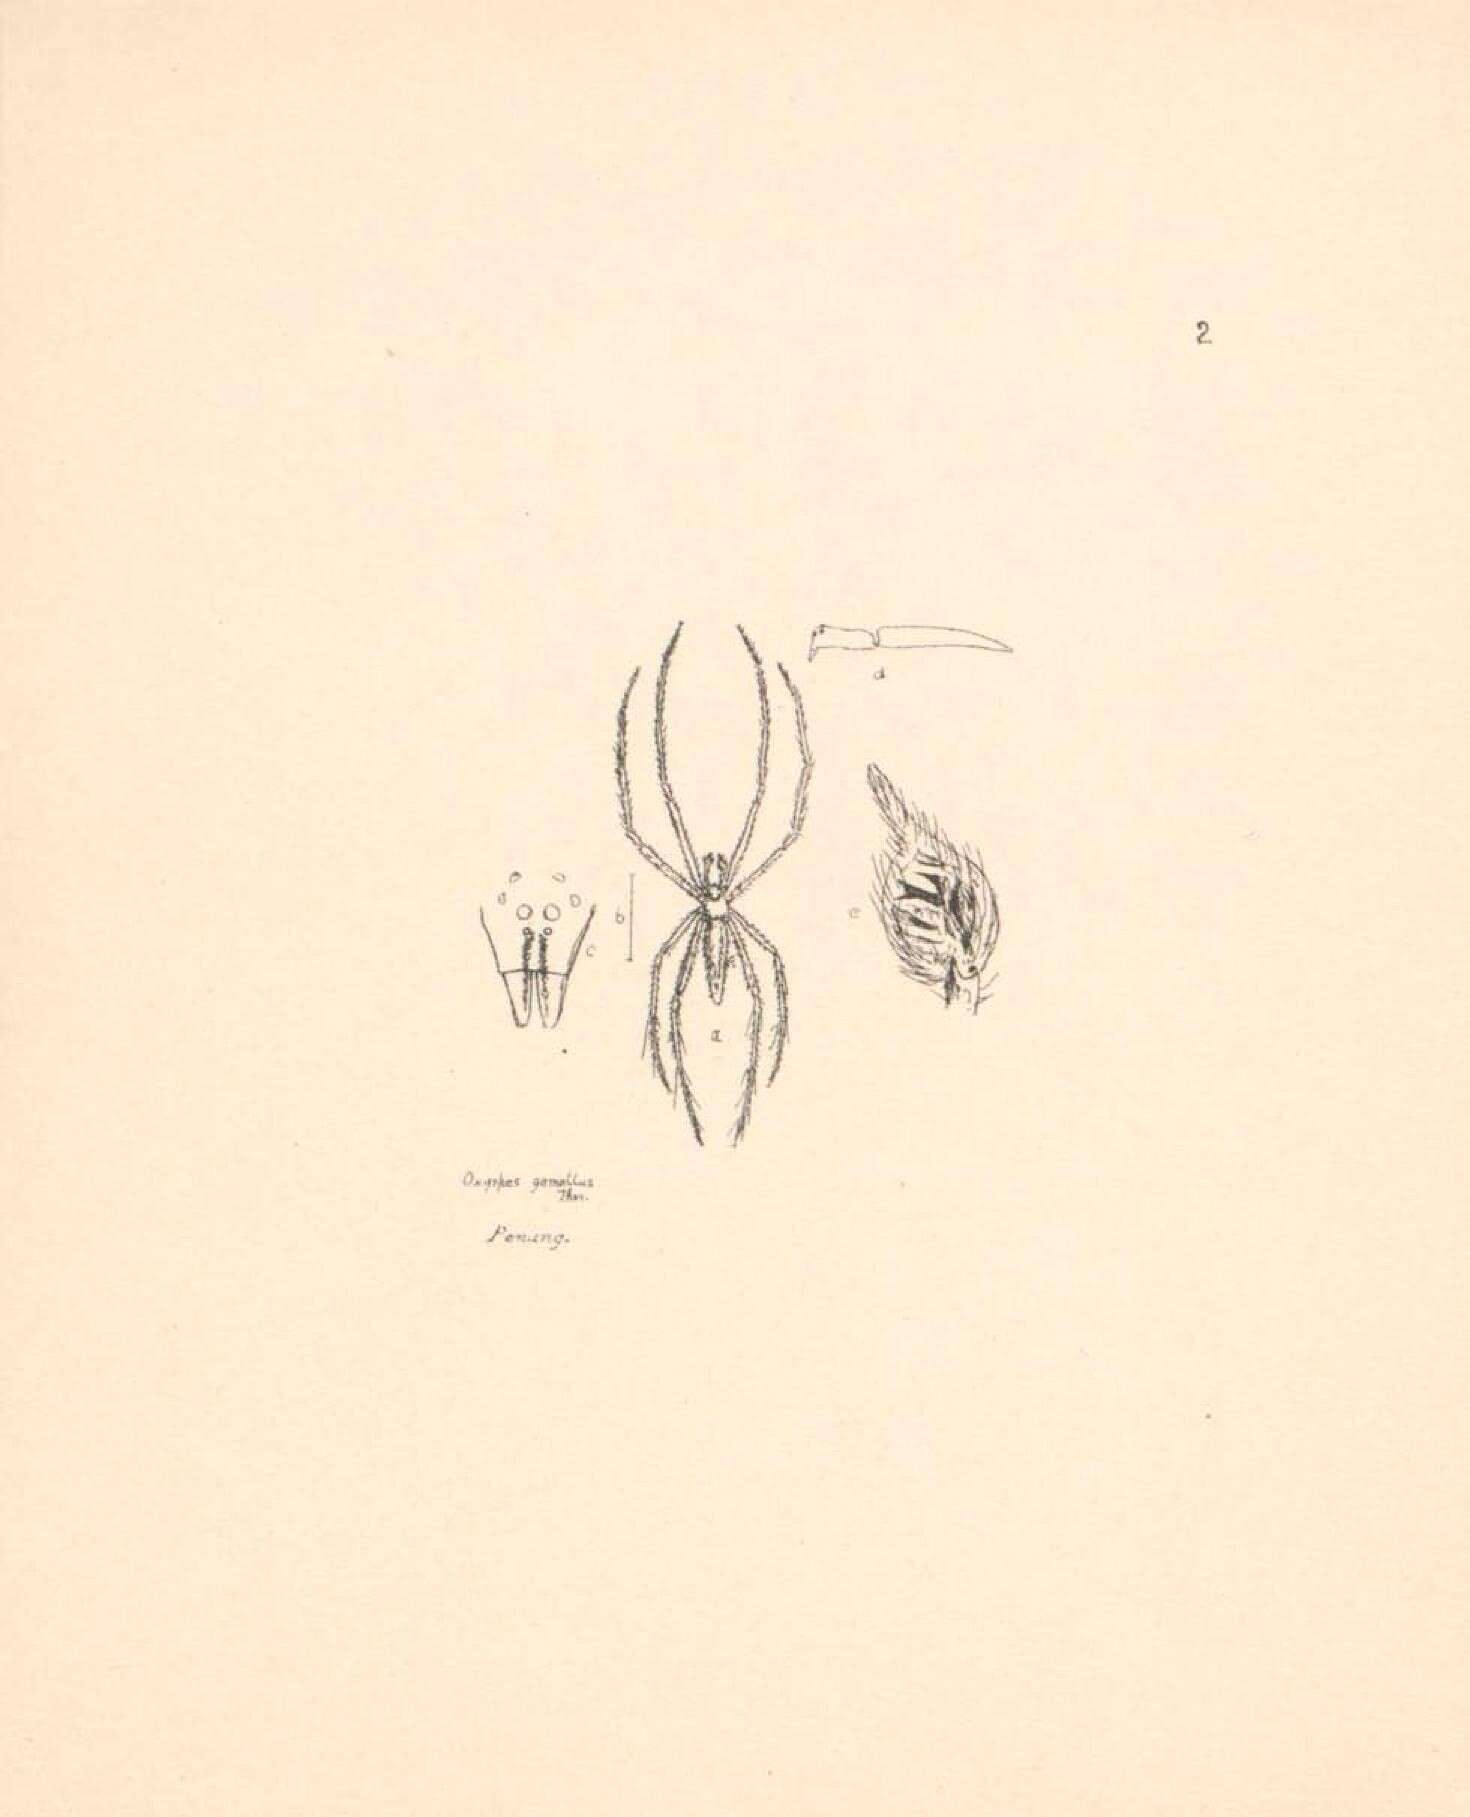 Image of Oxyopes gemellus Thorell 1891